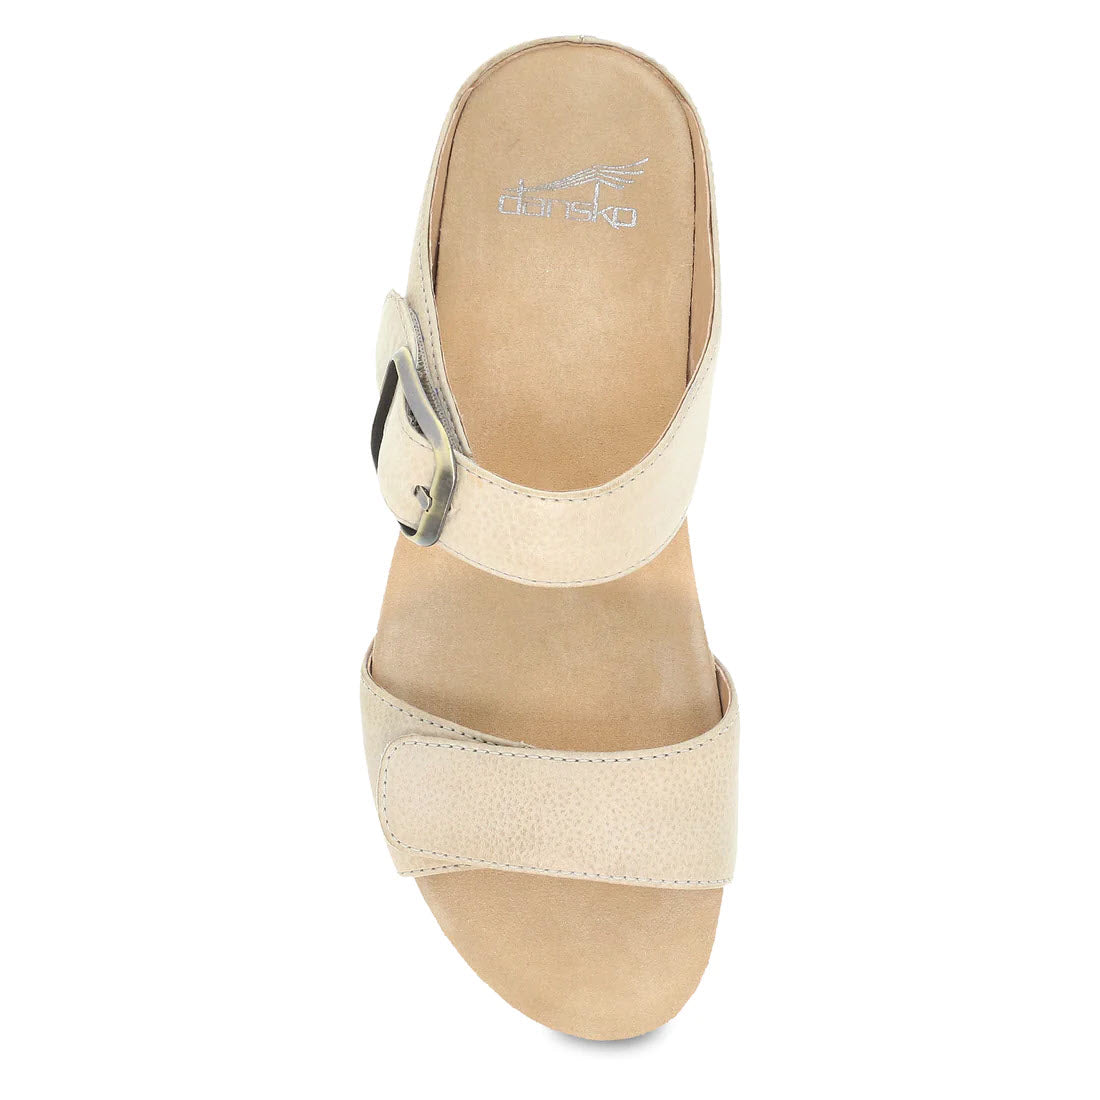 Top view of a beige Dansko Tanya Linen slide sandal with an adjustable strap and a round buckle, displaying the brand name on the insole.